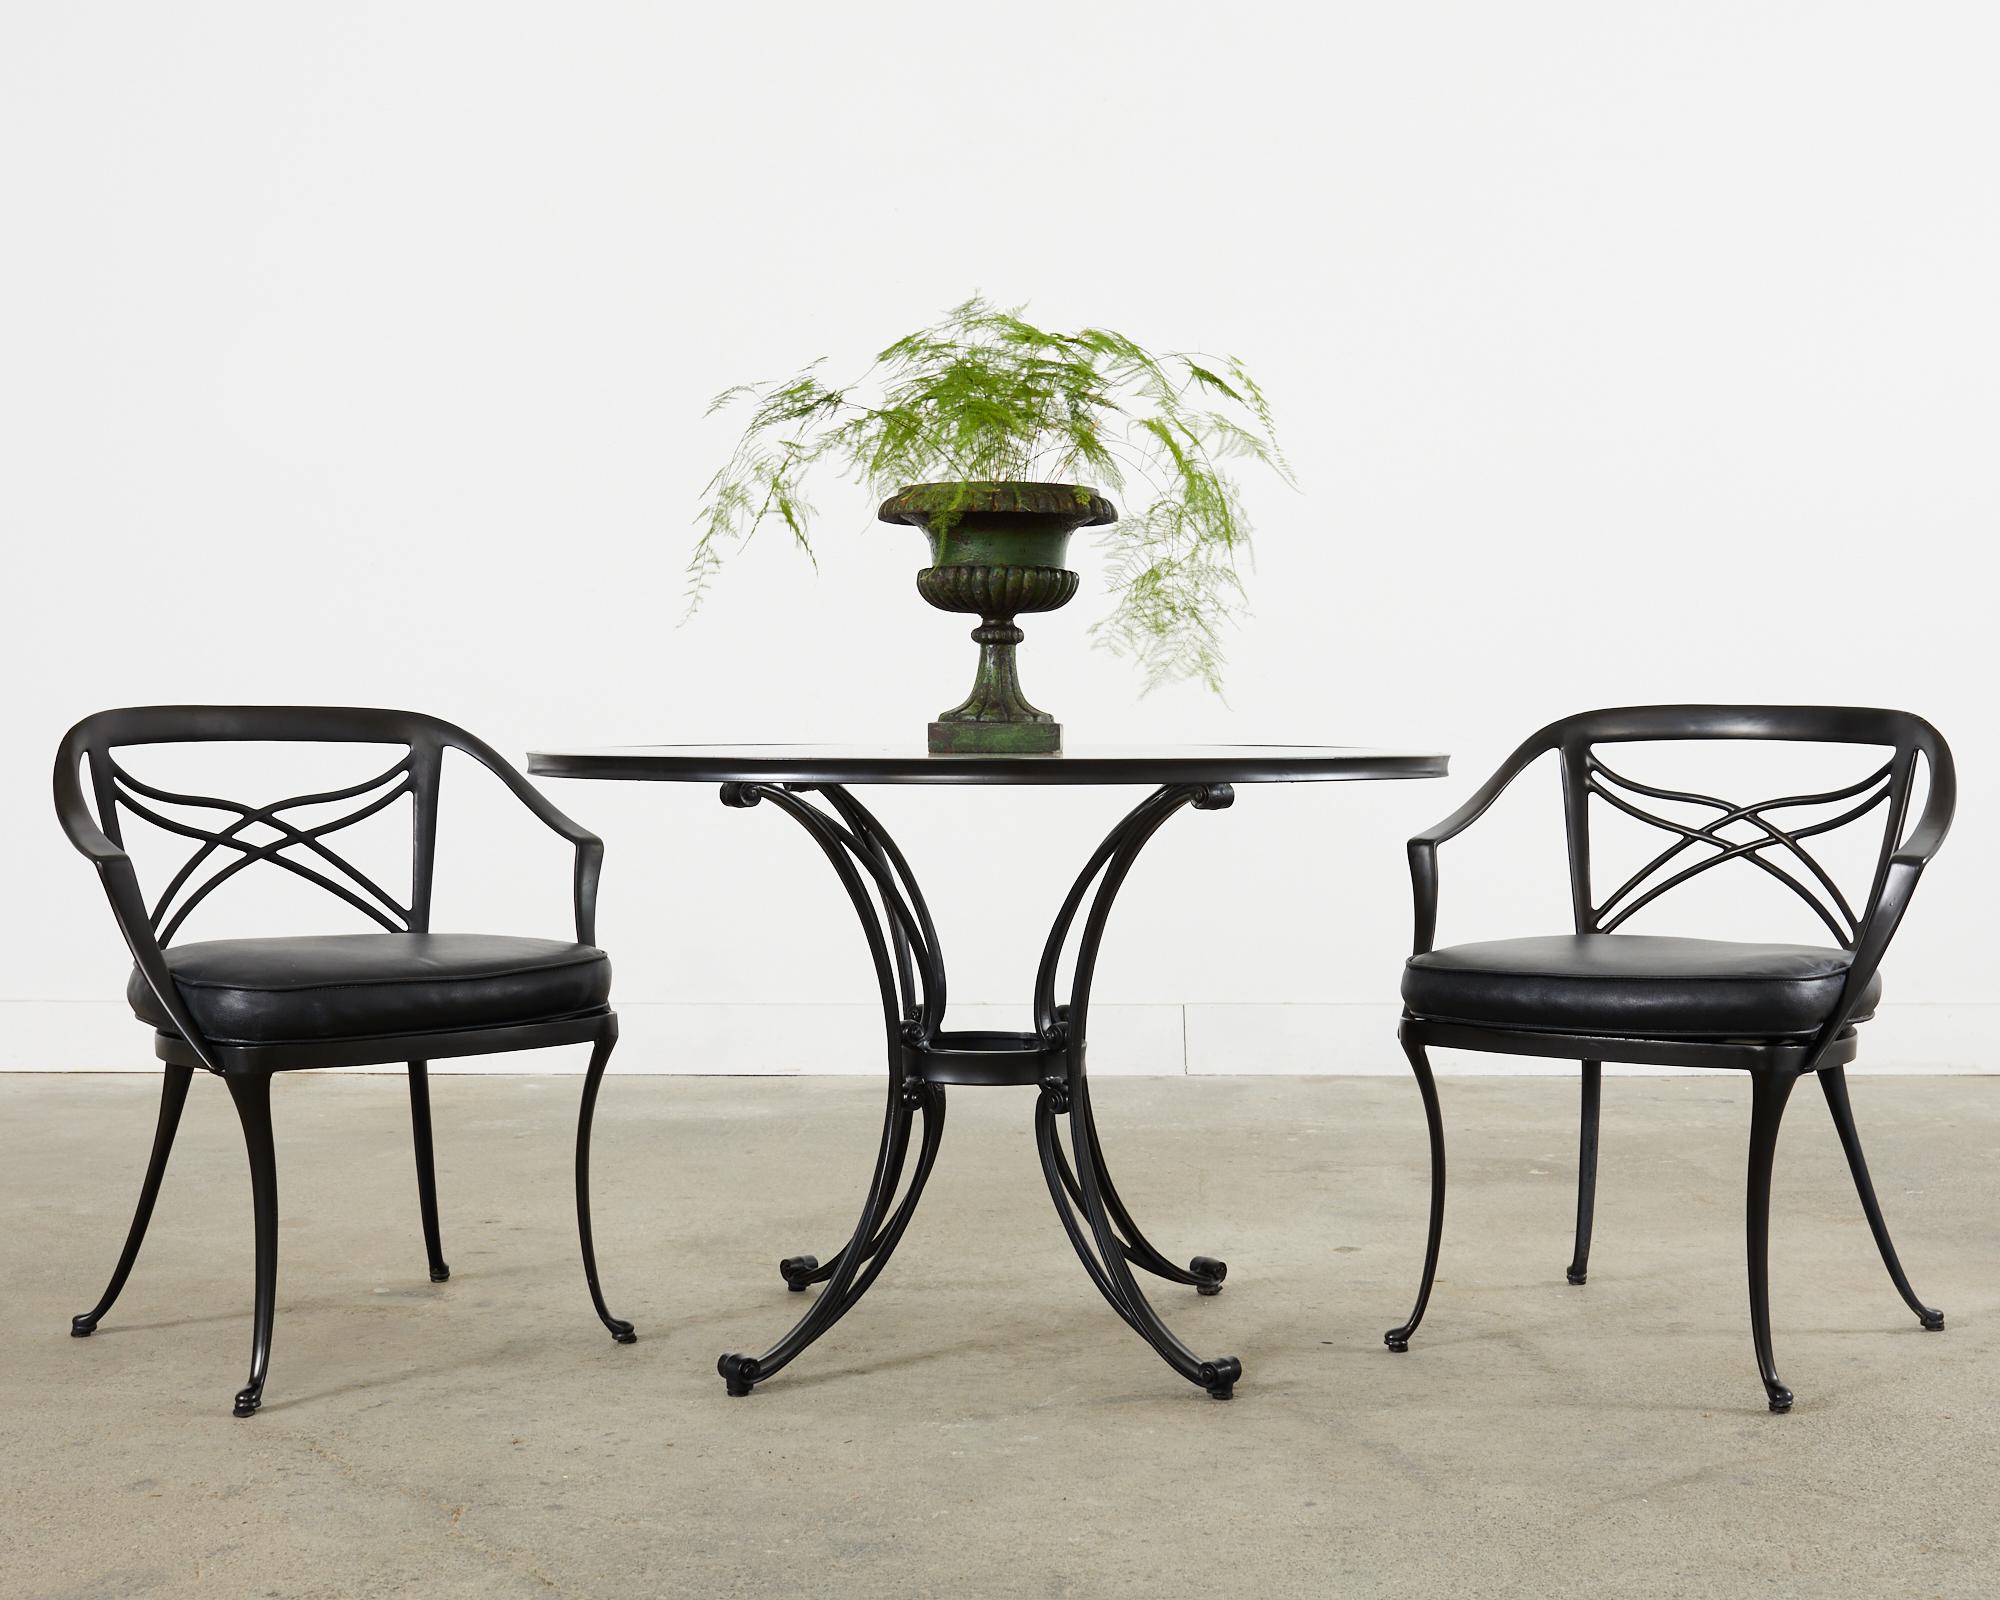 Neoclassical style patio and garden suite consisting of a glass top dining table and four dining chairs. Known as the classic collection by Brown Jordan. Constructed from gracefully curved cast aluminum with a later black paint finish. The round